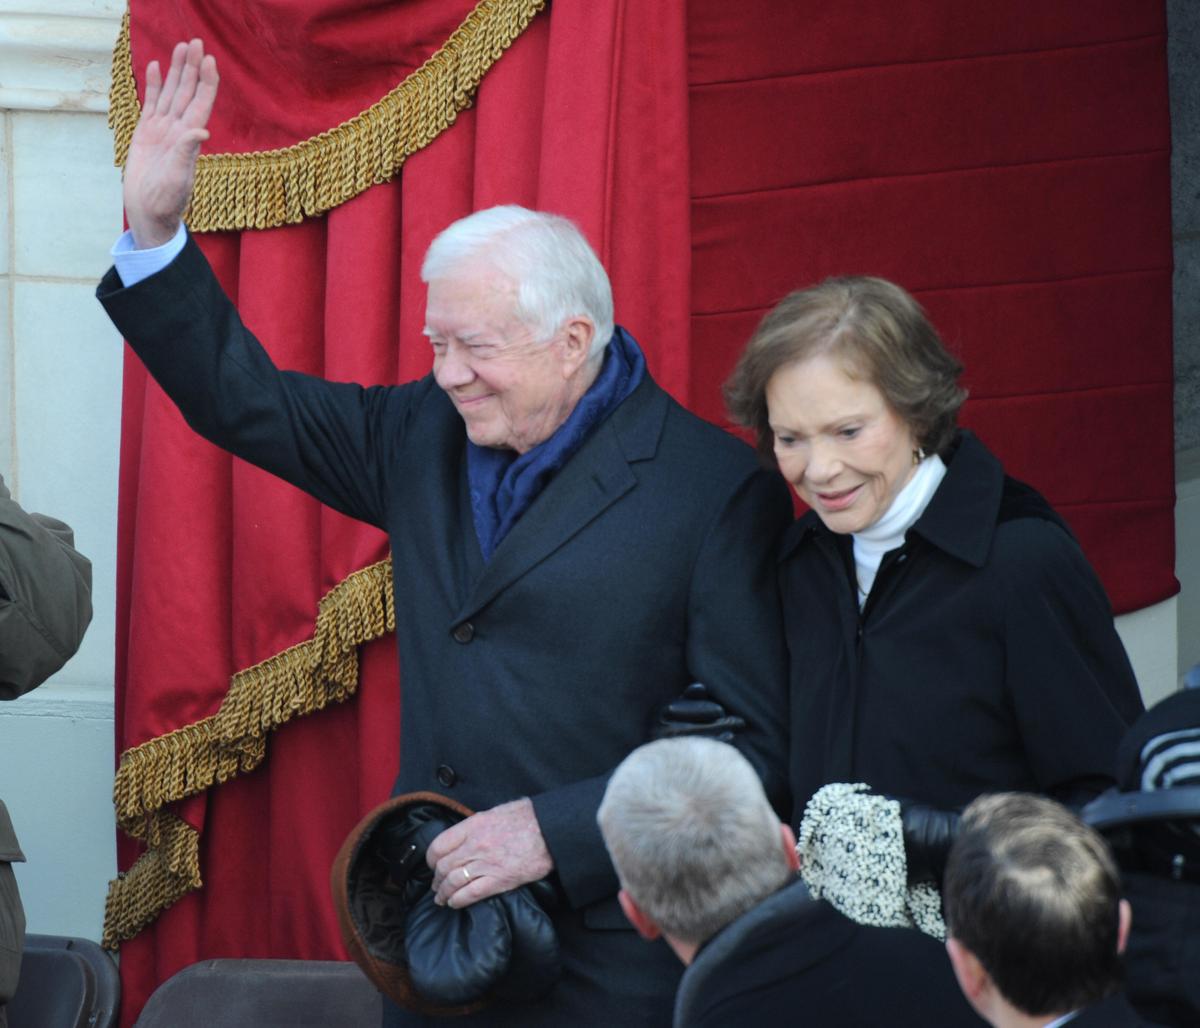 Former president Jimmy Carter and wife Rosayln arrive at the inauguration of Barack Obama as the 44th President of the United States of America on the West Front of the Capitol in Washington on Jan. 20, 2009. (Tim Sloan/AFP/Getty Images)